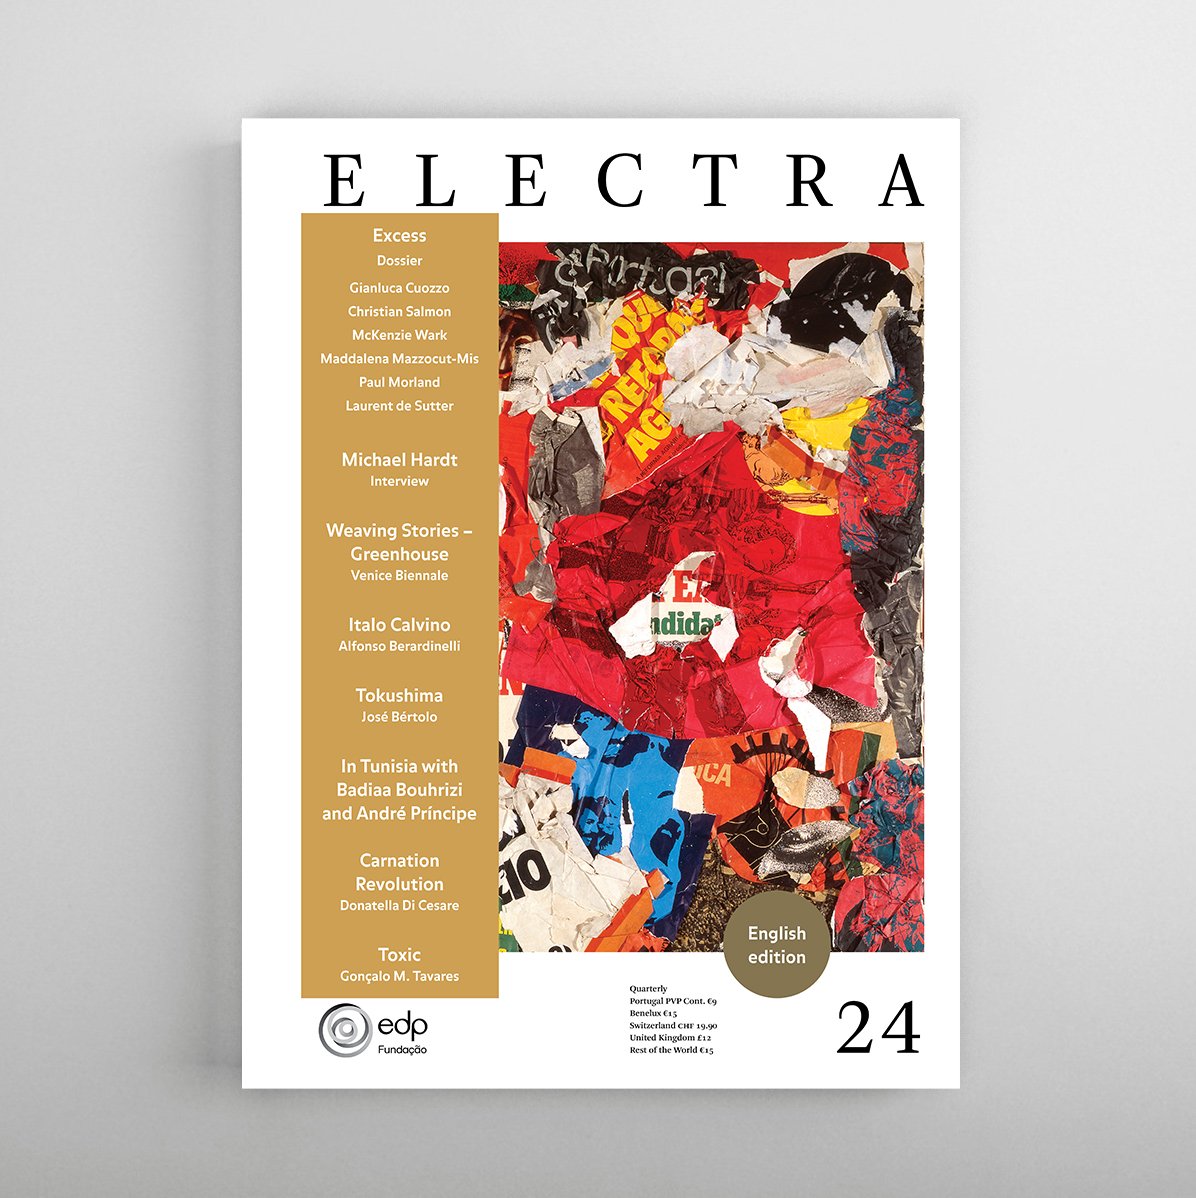 ELECTRA 24 is OUT!
Dossier: Excess

A law of excess rules the contemporary world in every domain. The products of consumer society, the financial logic, wealth and poverty, the phenomena of social and political life, the growth of cities, the circula